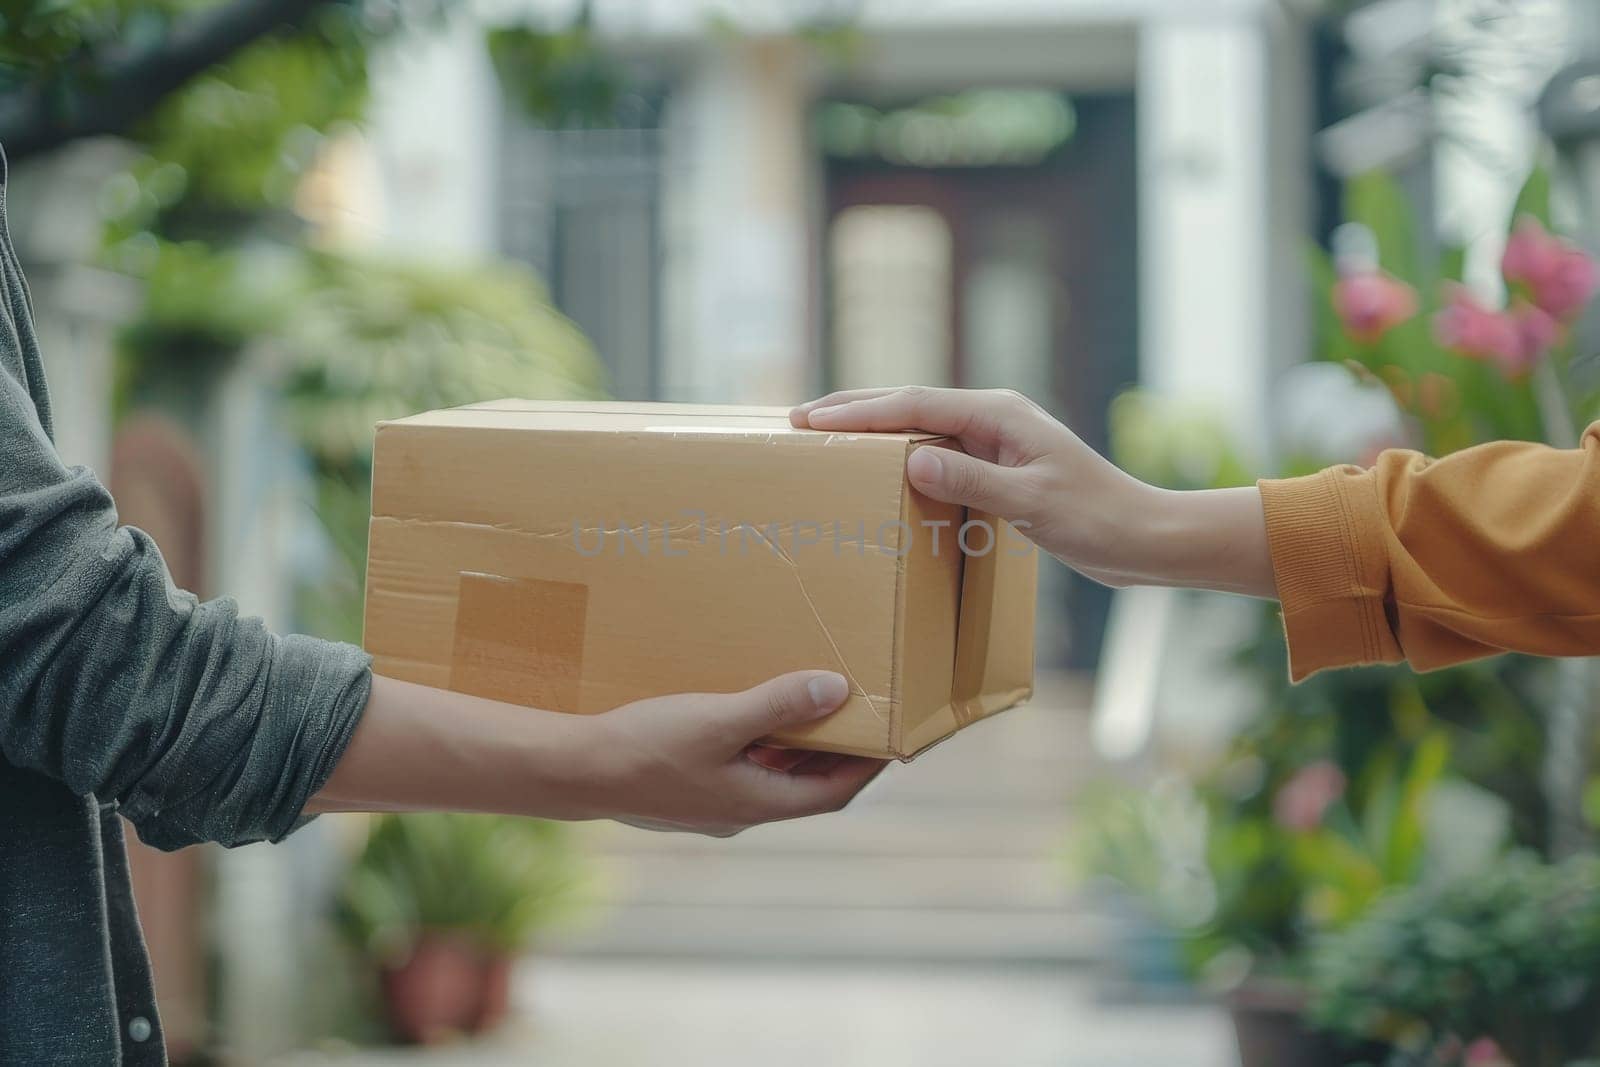 Man hand accepting a delivery of boxes from deliveryman, Delivery concept.